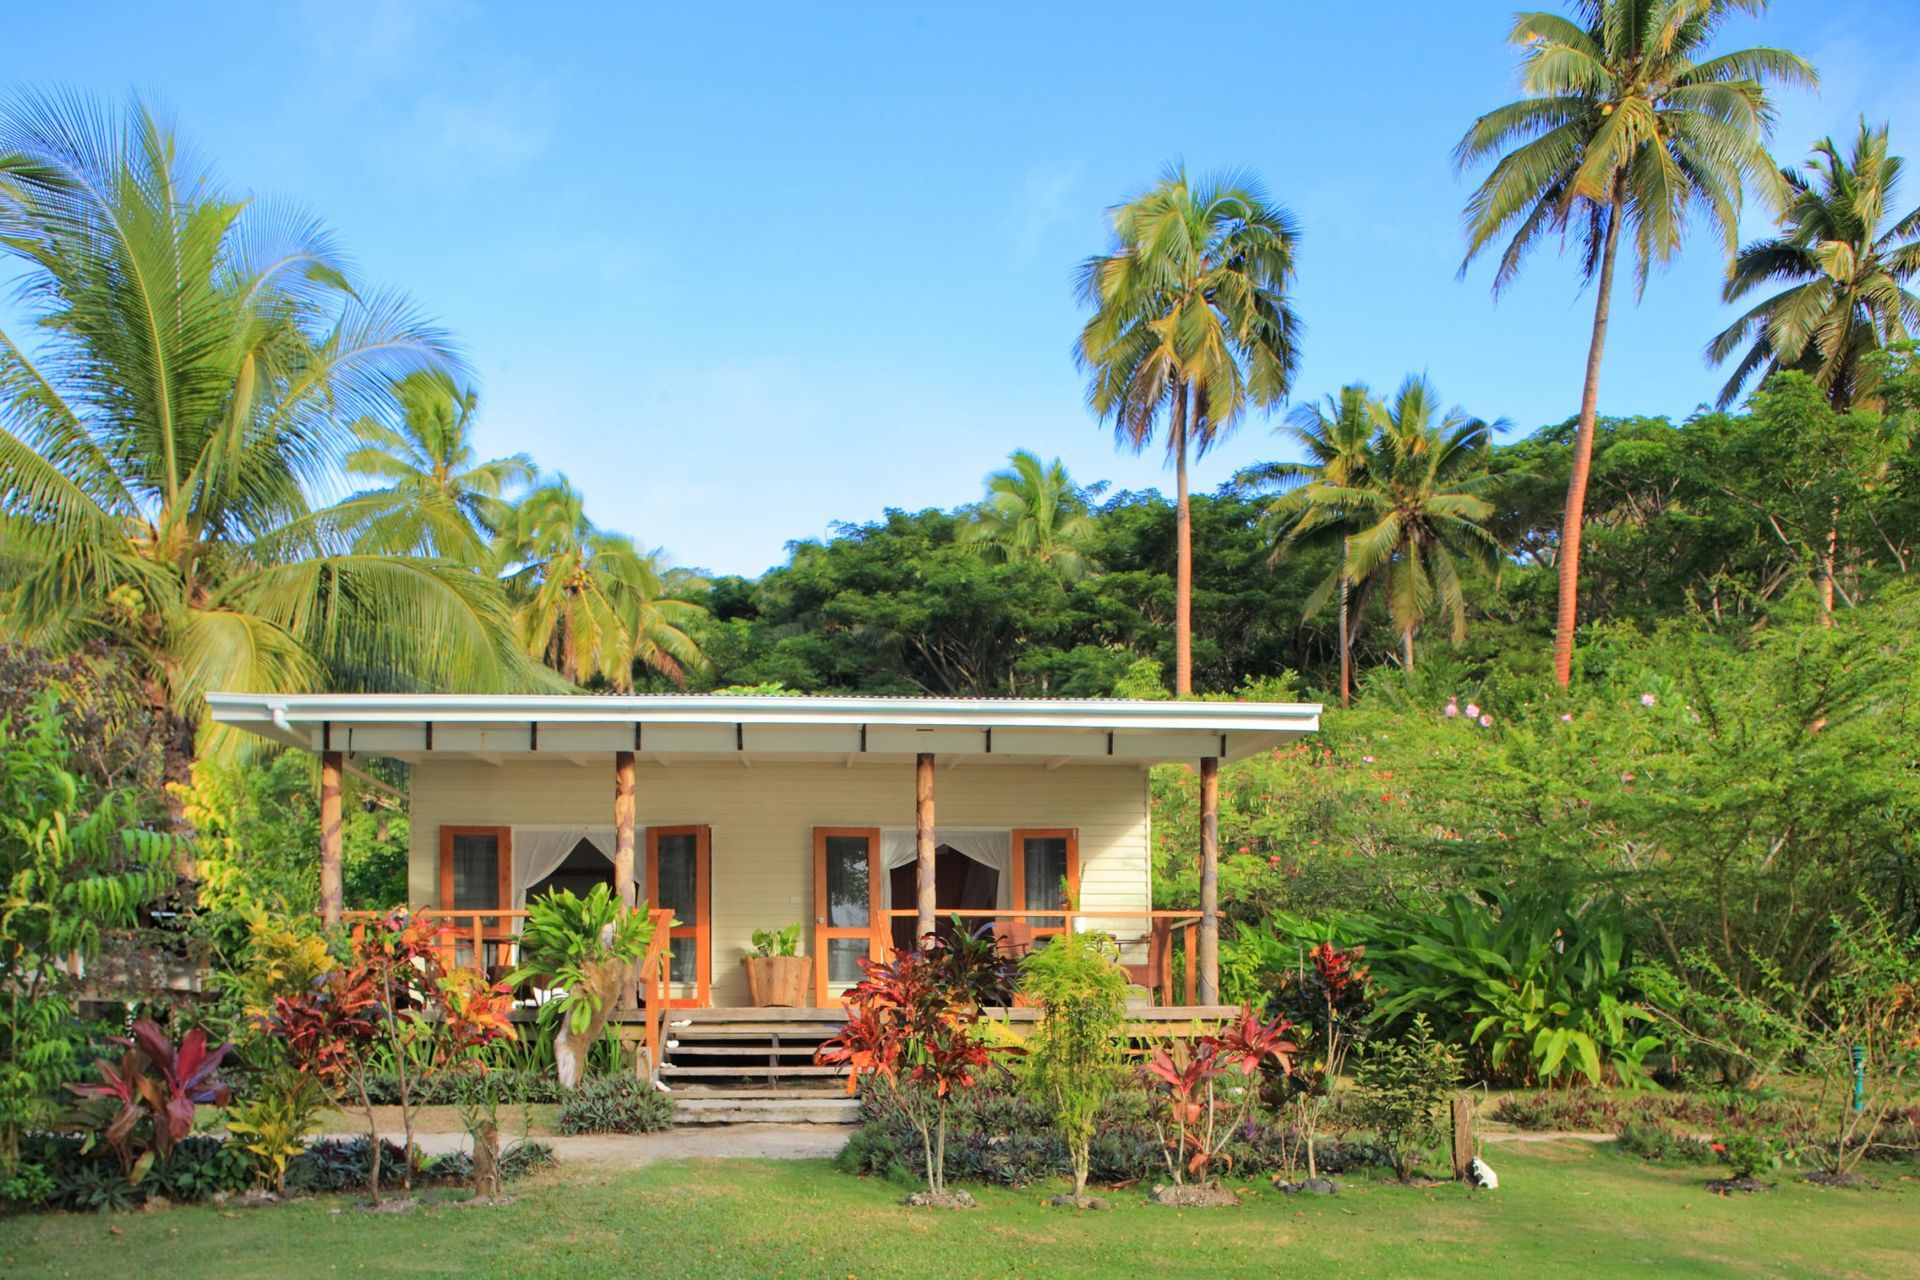 The surrounding verdant gardens and coconut trees around the deluxe beach front villa at Sau Bay Resort in Fiji 